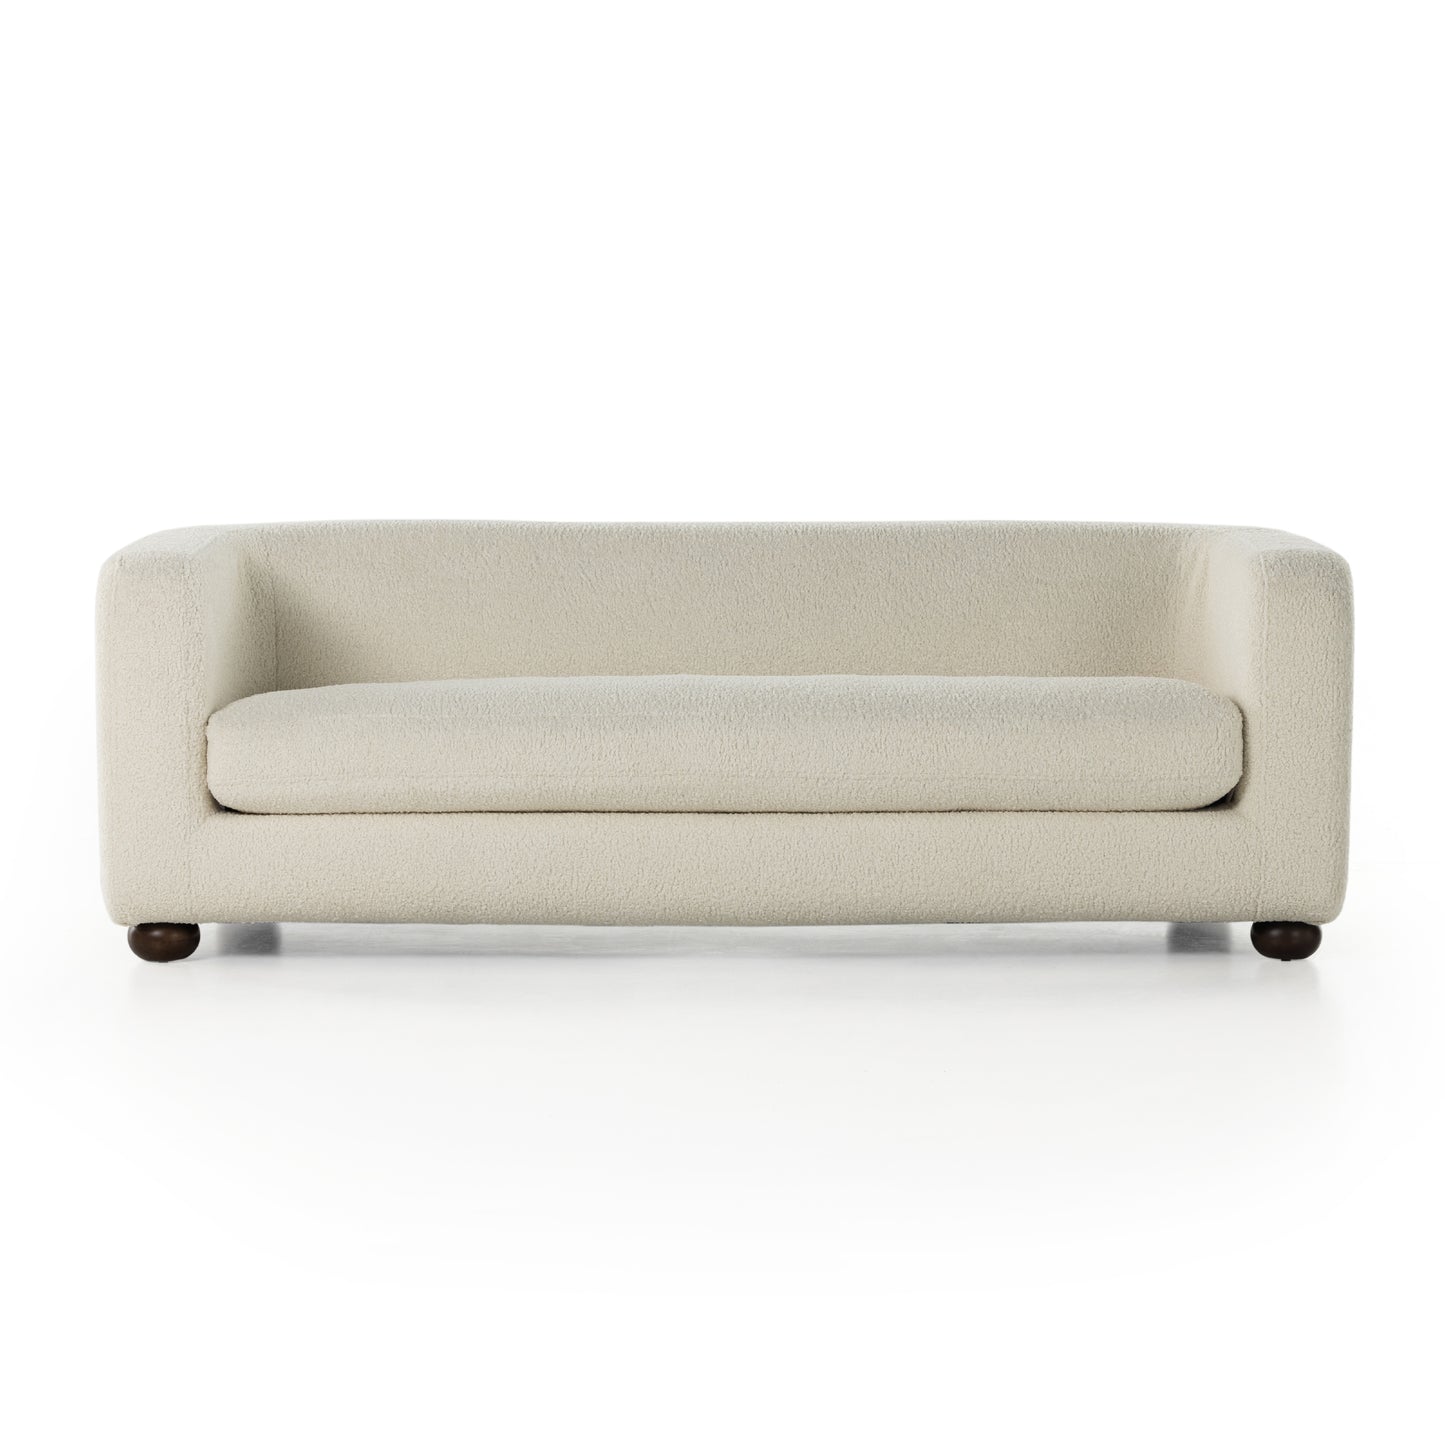 Load image into Gallery viewer, Gidget Sofa Sofa Four Hands     Four Hands, Mid Century Modern Furniture, Old Bones Furniture Company, Old Bones Co, Modern Mid Century, Designer Furniture, https://www.oldbonesco.com/
